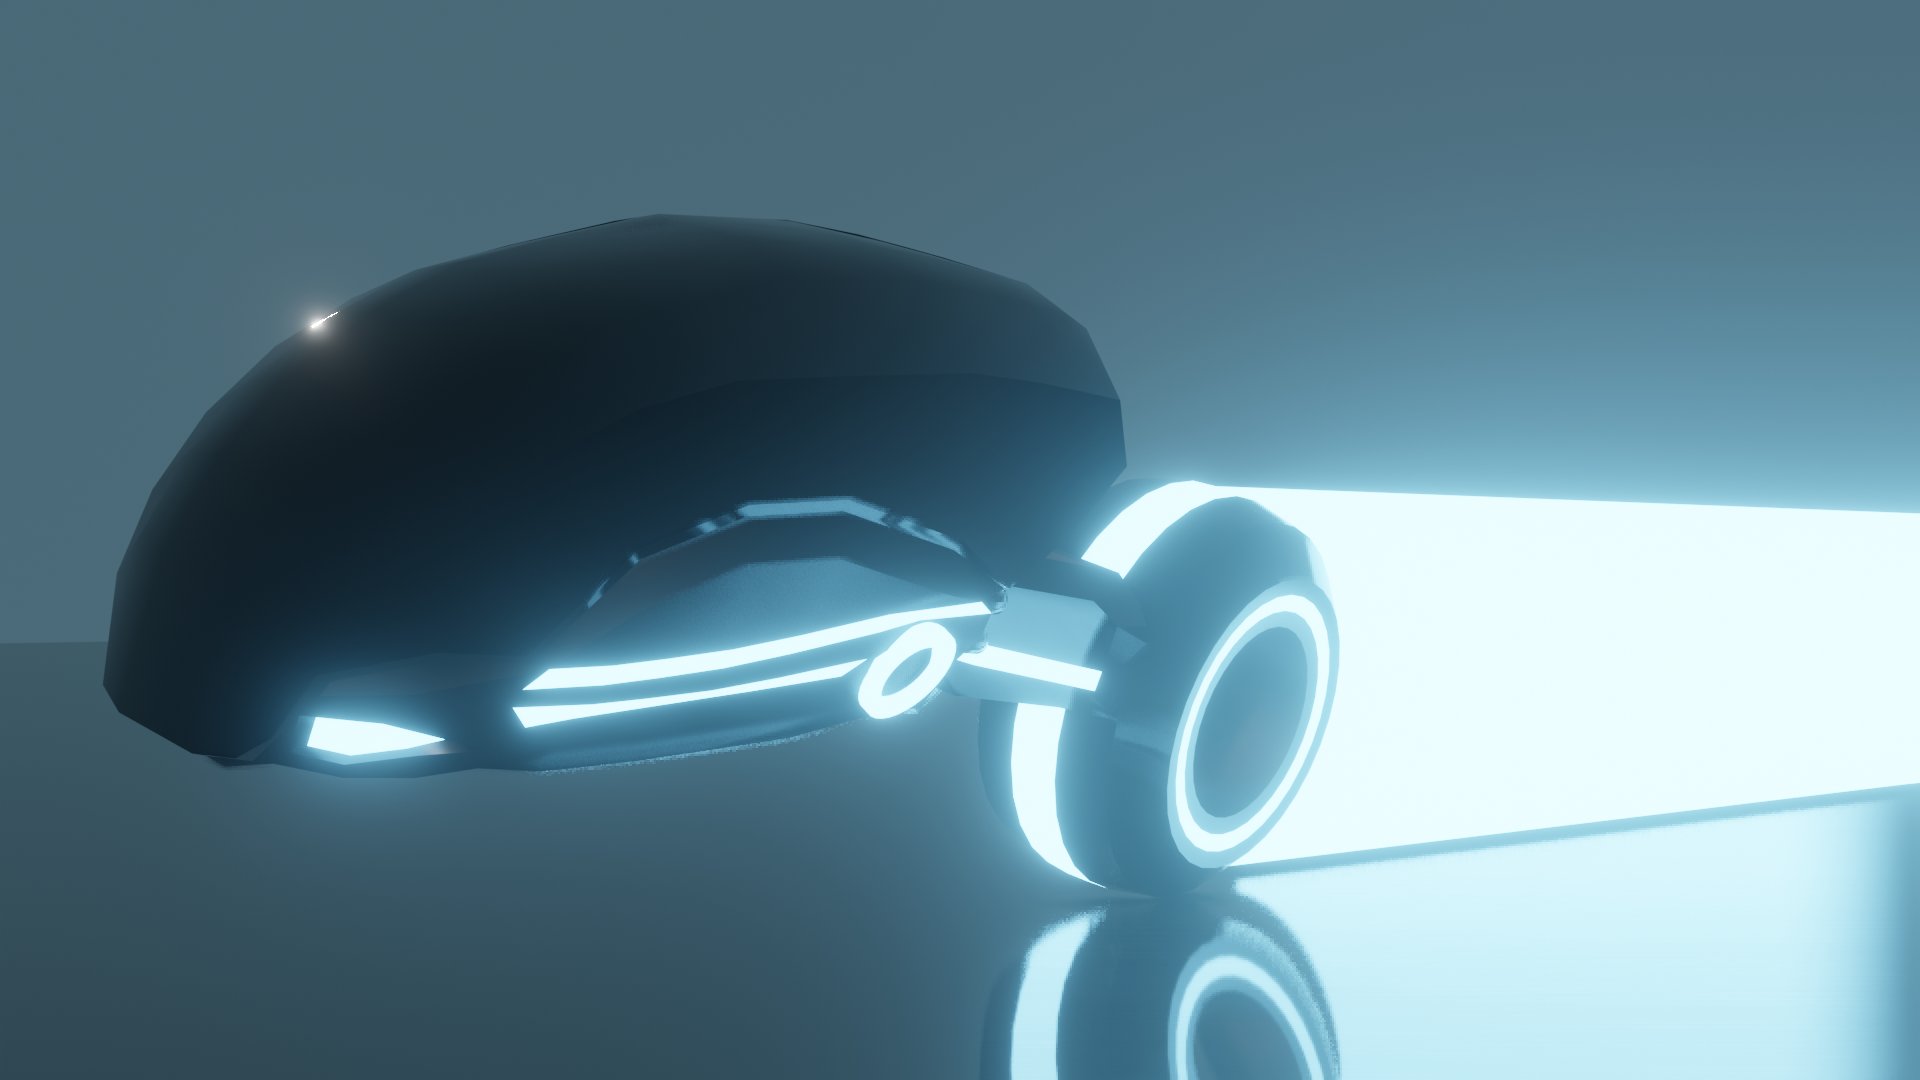 Coynese So Said My Volt Bike Model For #Jailbreak Wasn't As Tron Like As He Liked, So I Made Some Modifications To My Model To Make It Feel More